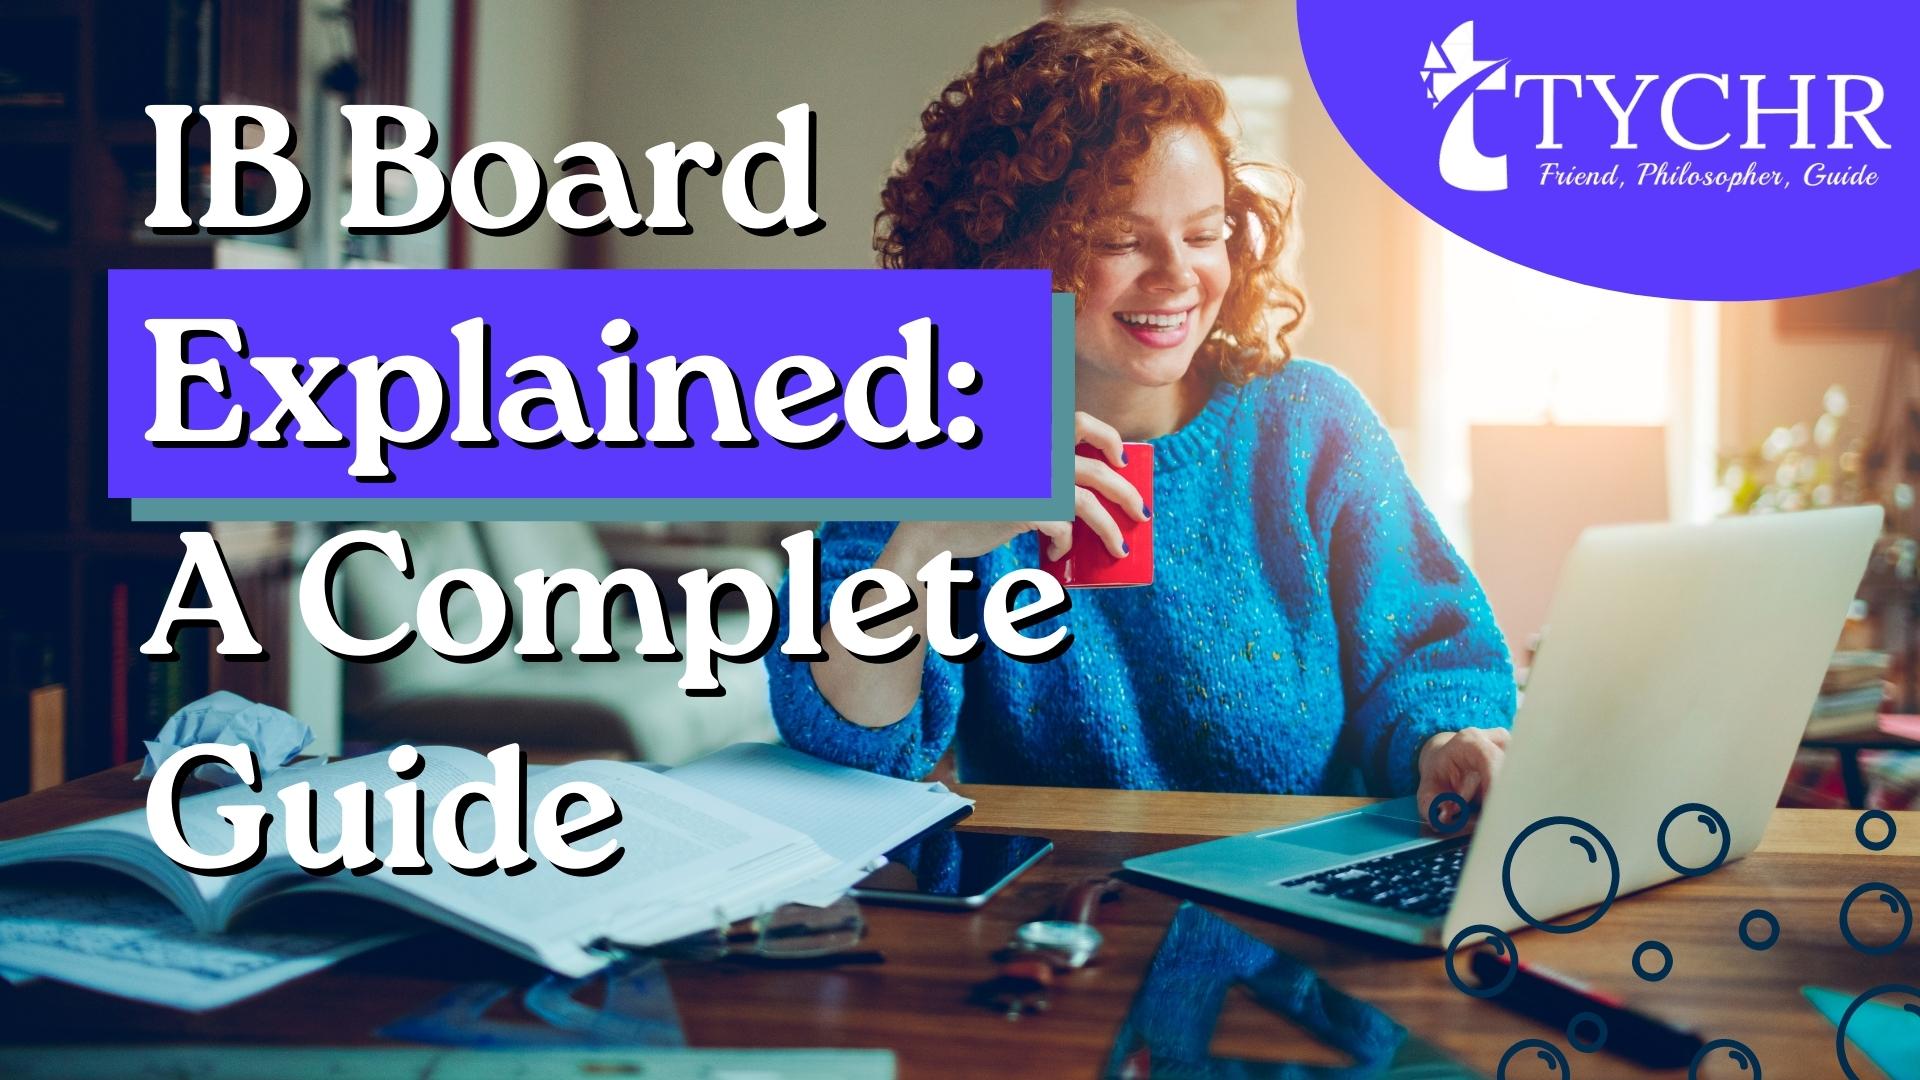 IB Board Explained: A Complete Guide